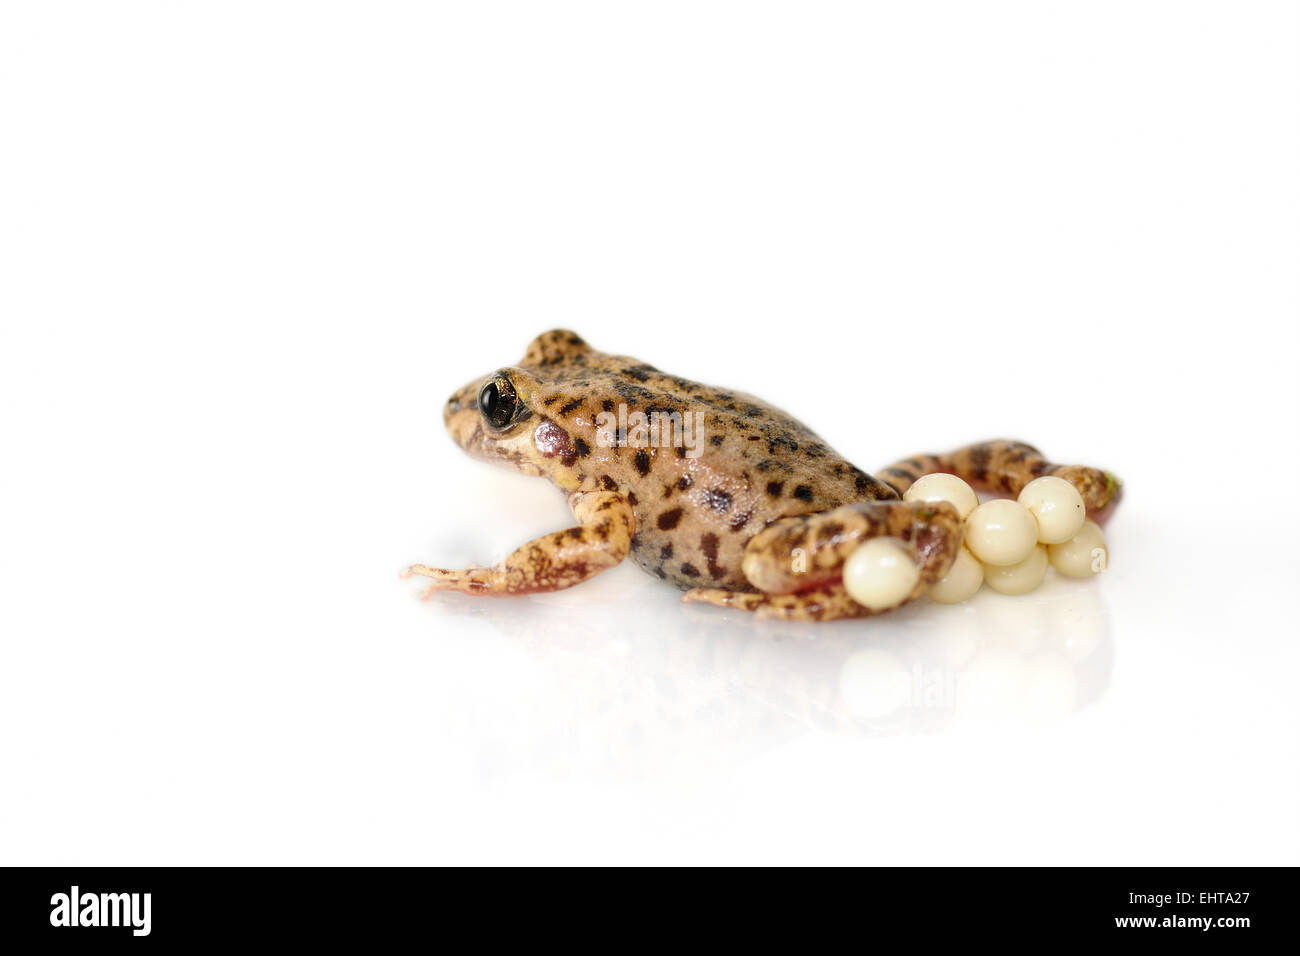 [captive] The Majorcan midwife toad (Alytes muletensis) is endemic to the rocky sandstone terrain of the Serra de Tramuntana in Stock Photo